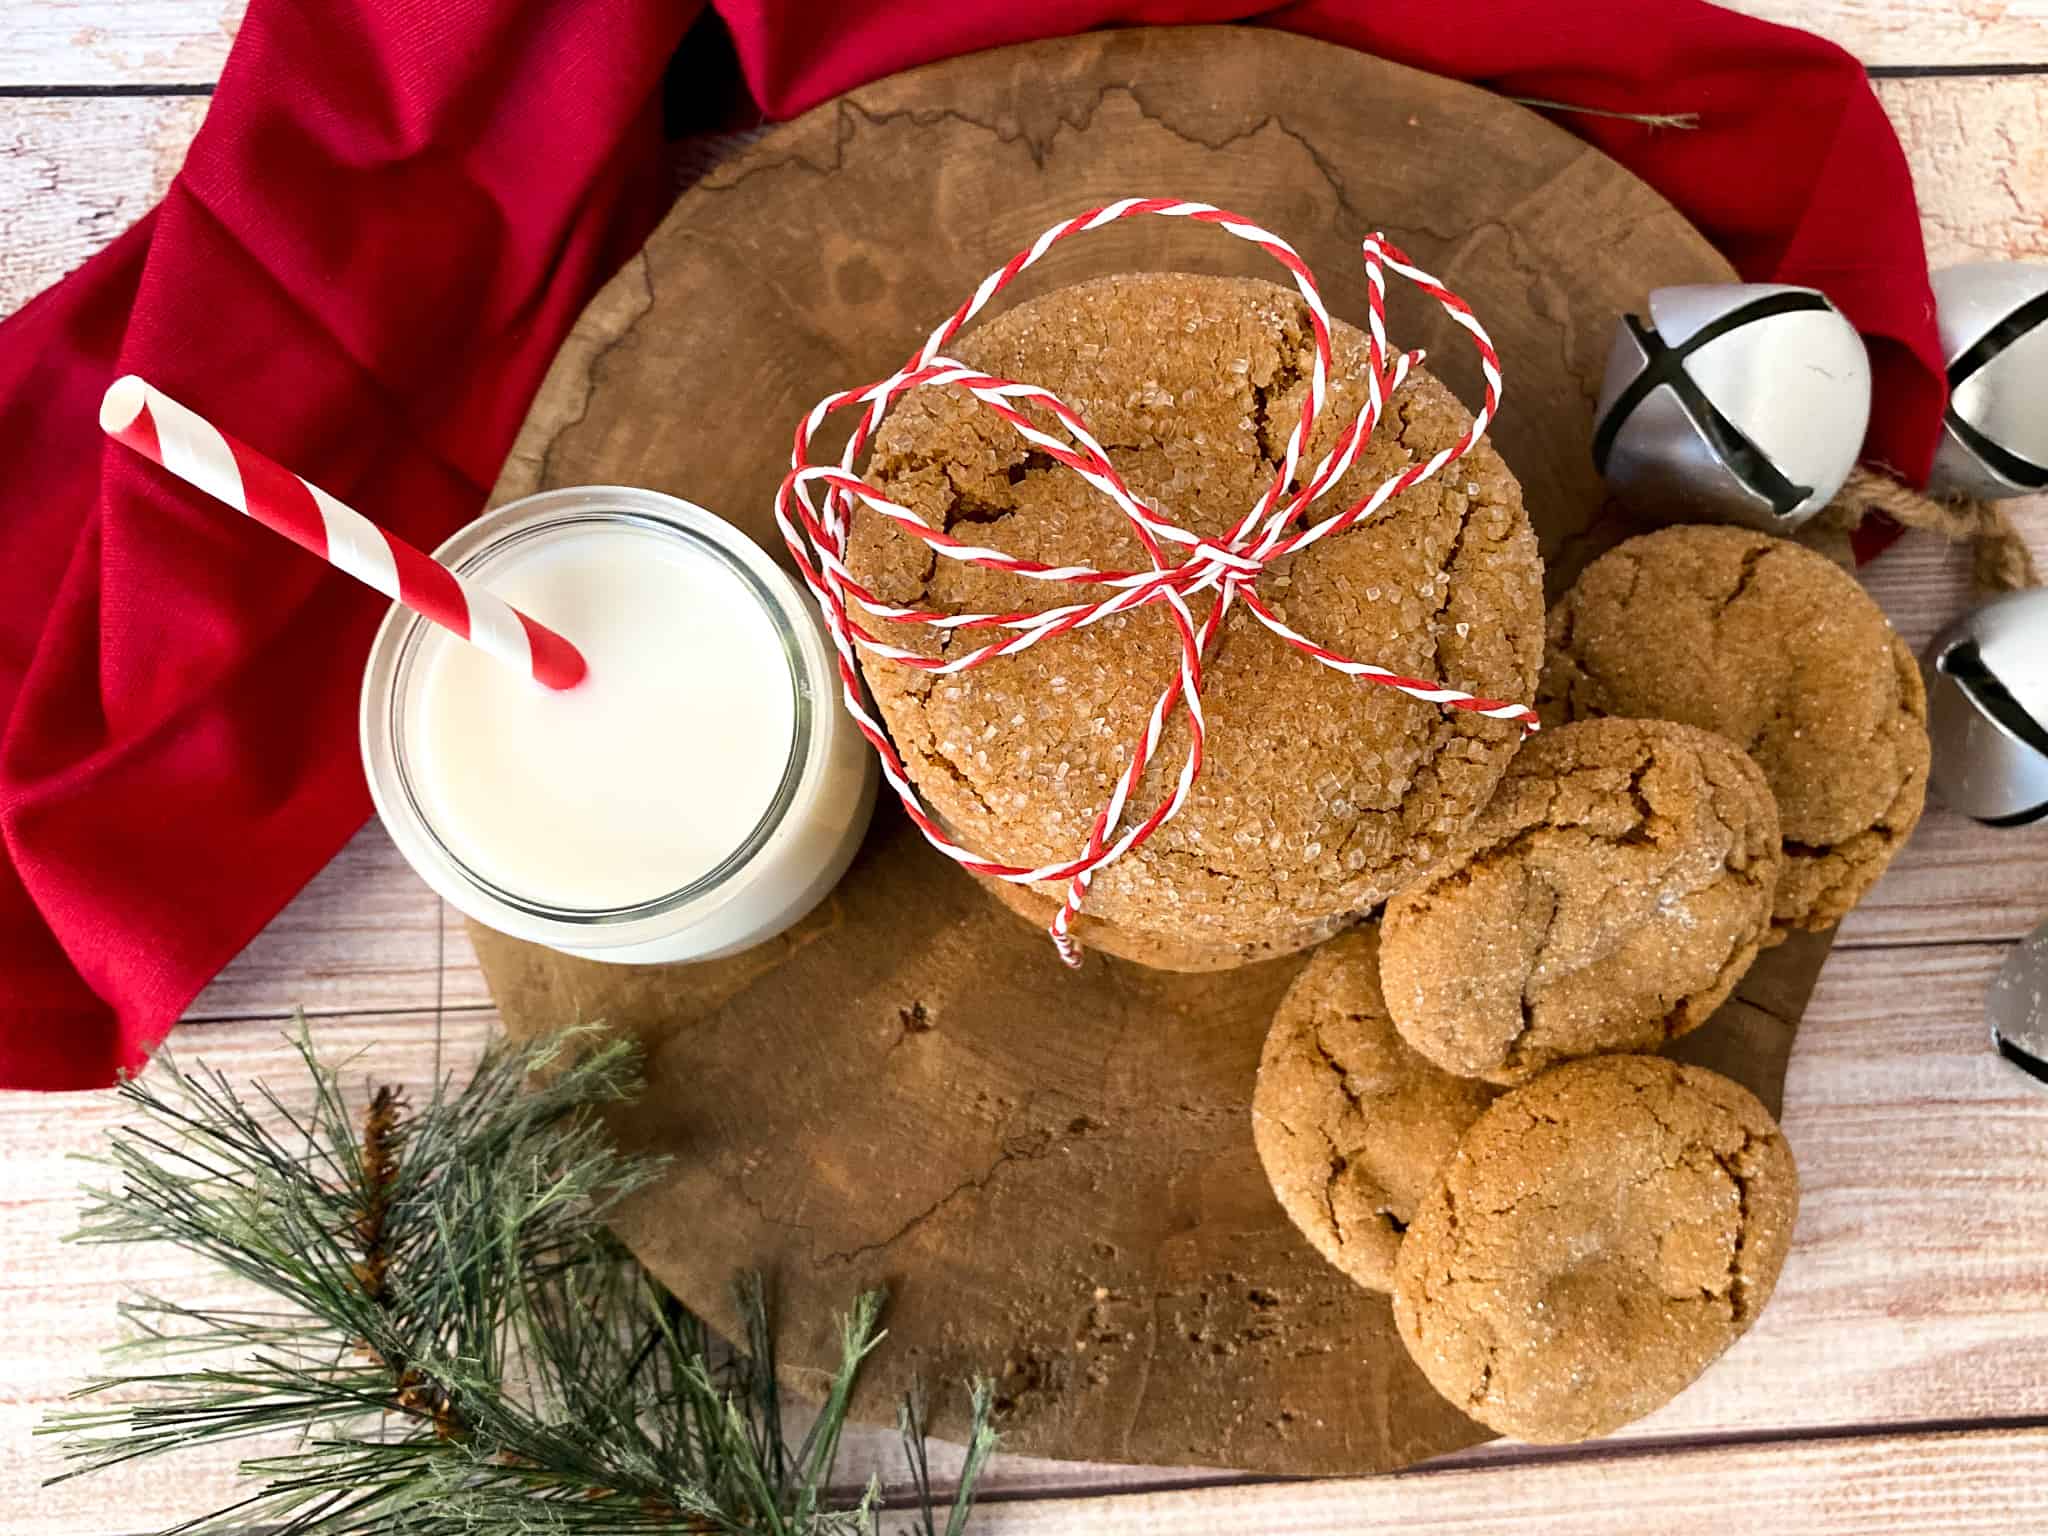 Old Fashioned gingersnap cookies on a large wooden slab. Crackled cookies are tied up with red and white string. There is a glass of milk, silver bells, and a sprig of spruce as well as a red linen napkin in the foreground.